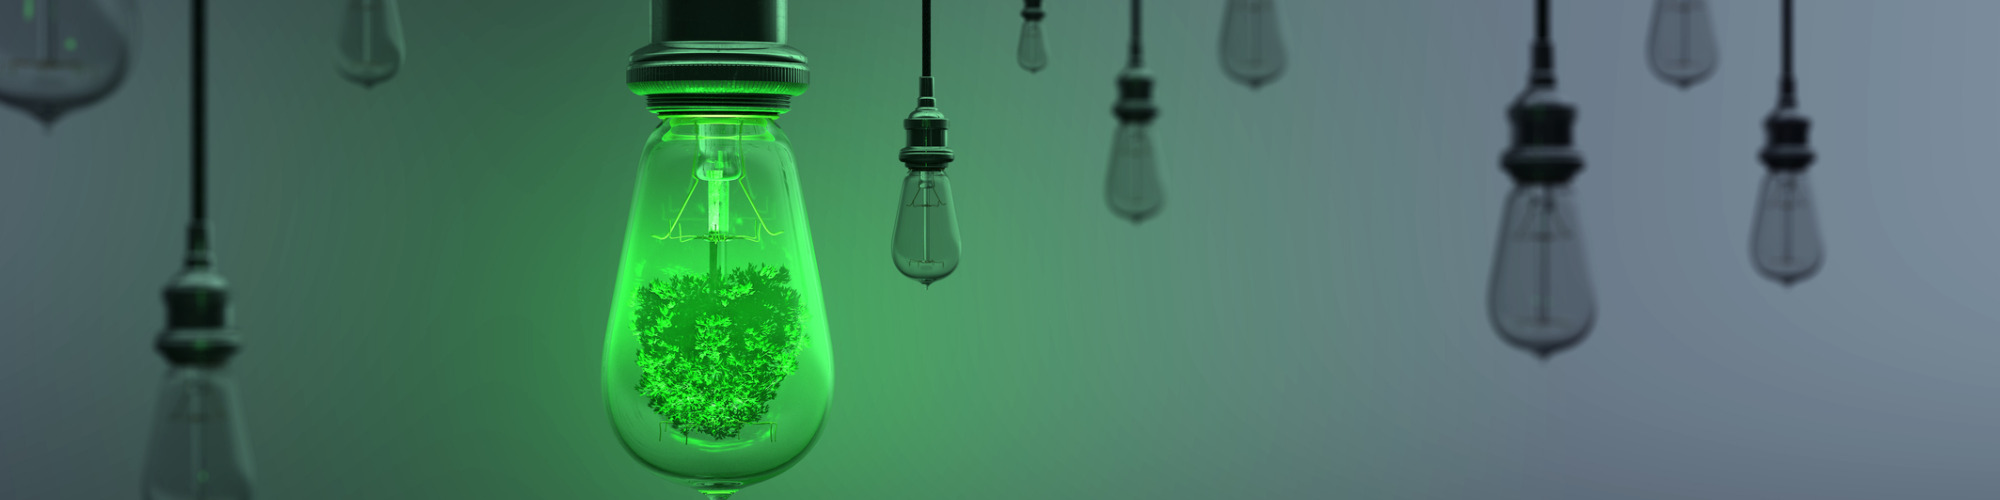 IP & Climate Change - How to Protect Green Innovations